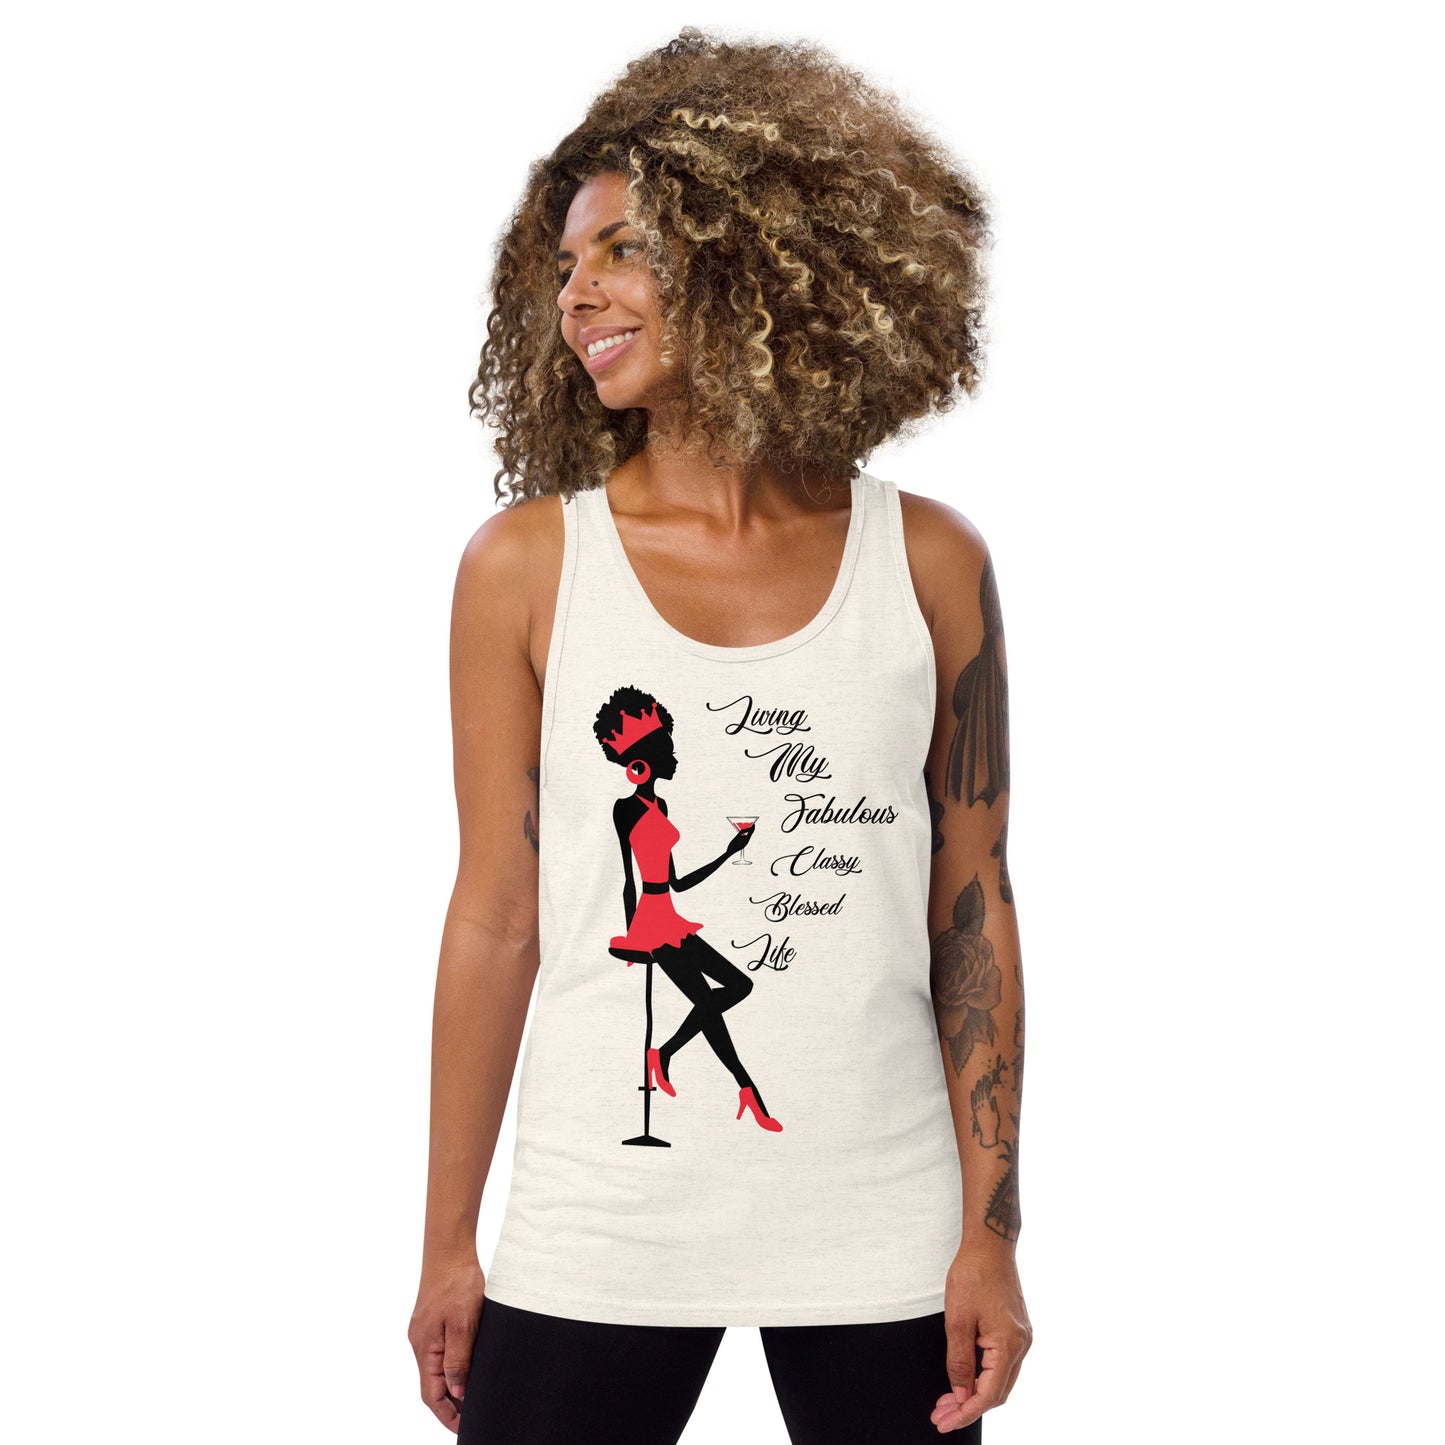 LIVING MY FABULOUS, CLASSY, BLESSED LIFE- Unisex Tank Top